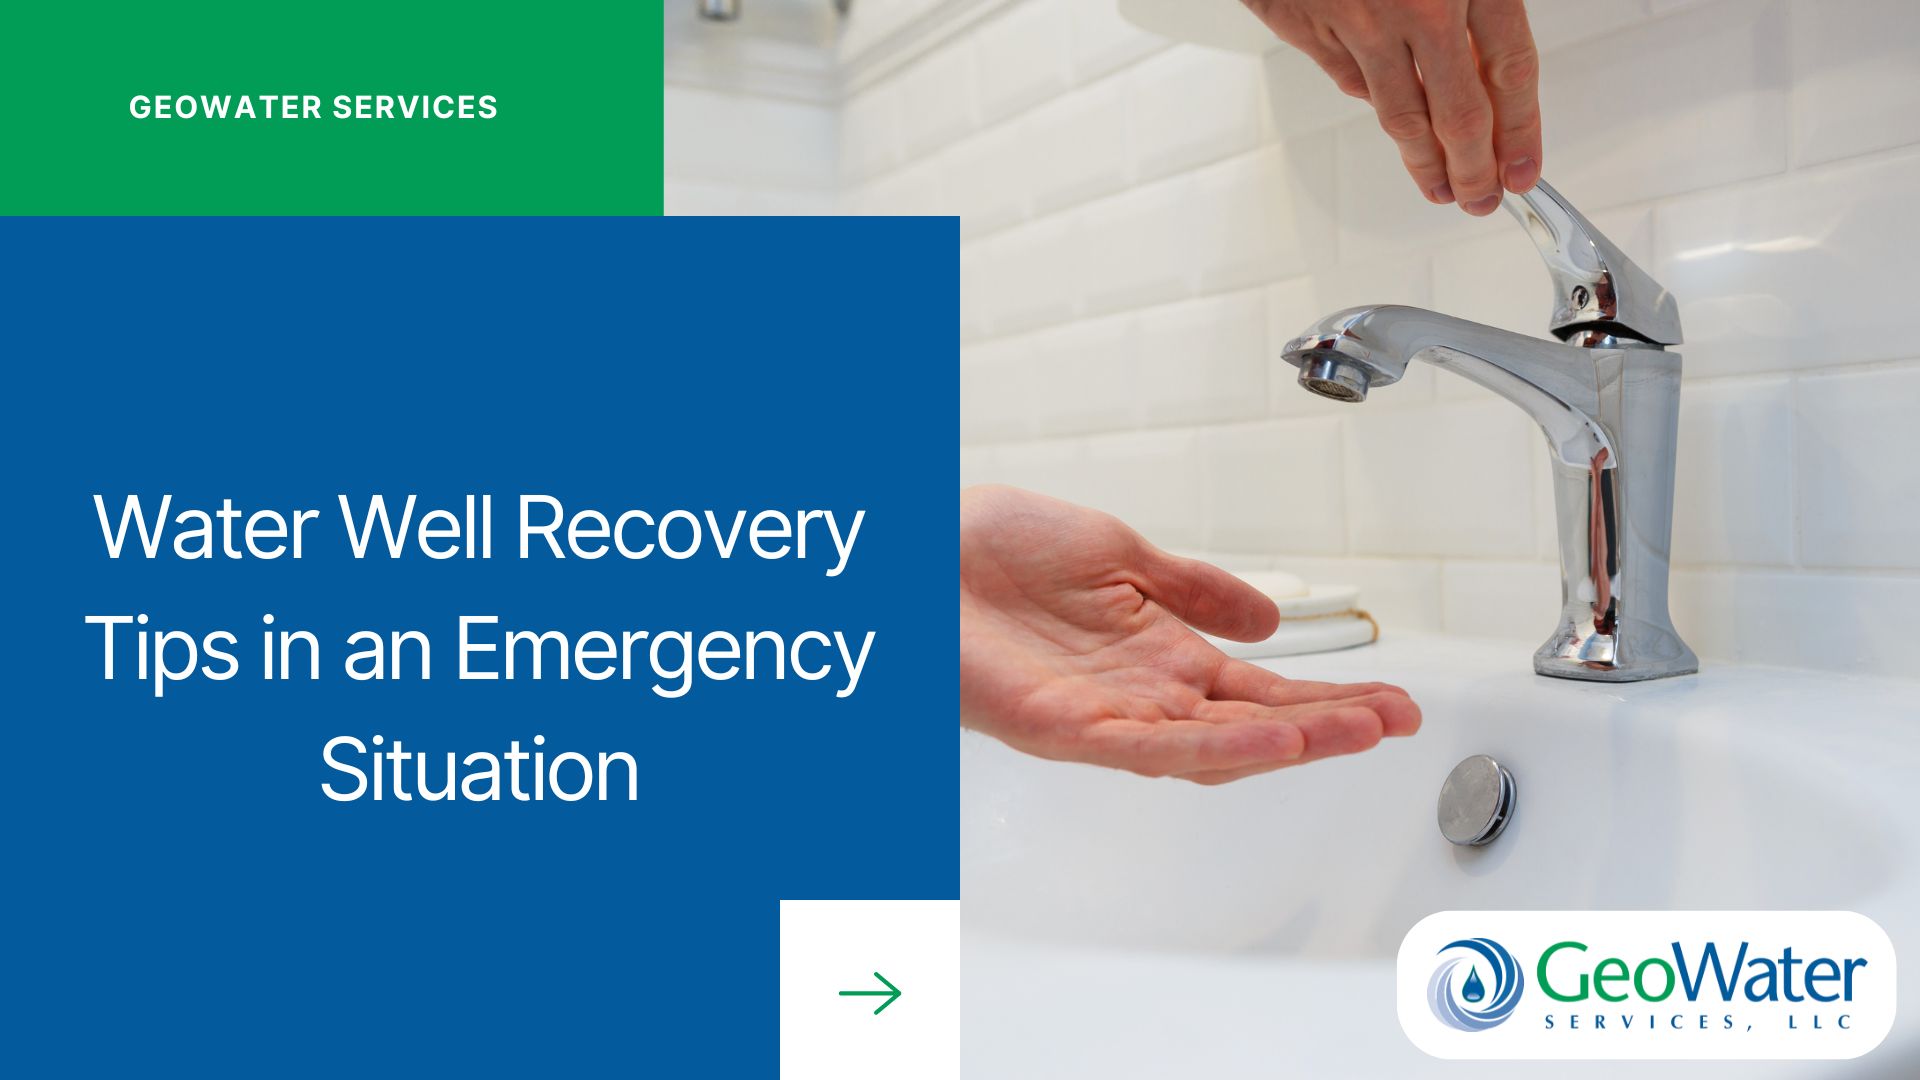 Water Well Recovery Tips in an Emergency Situation